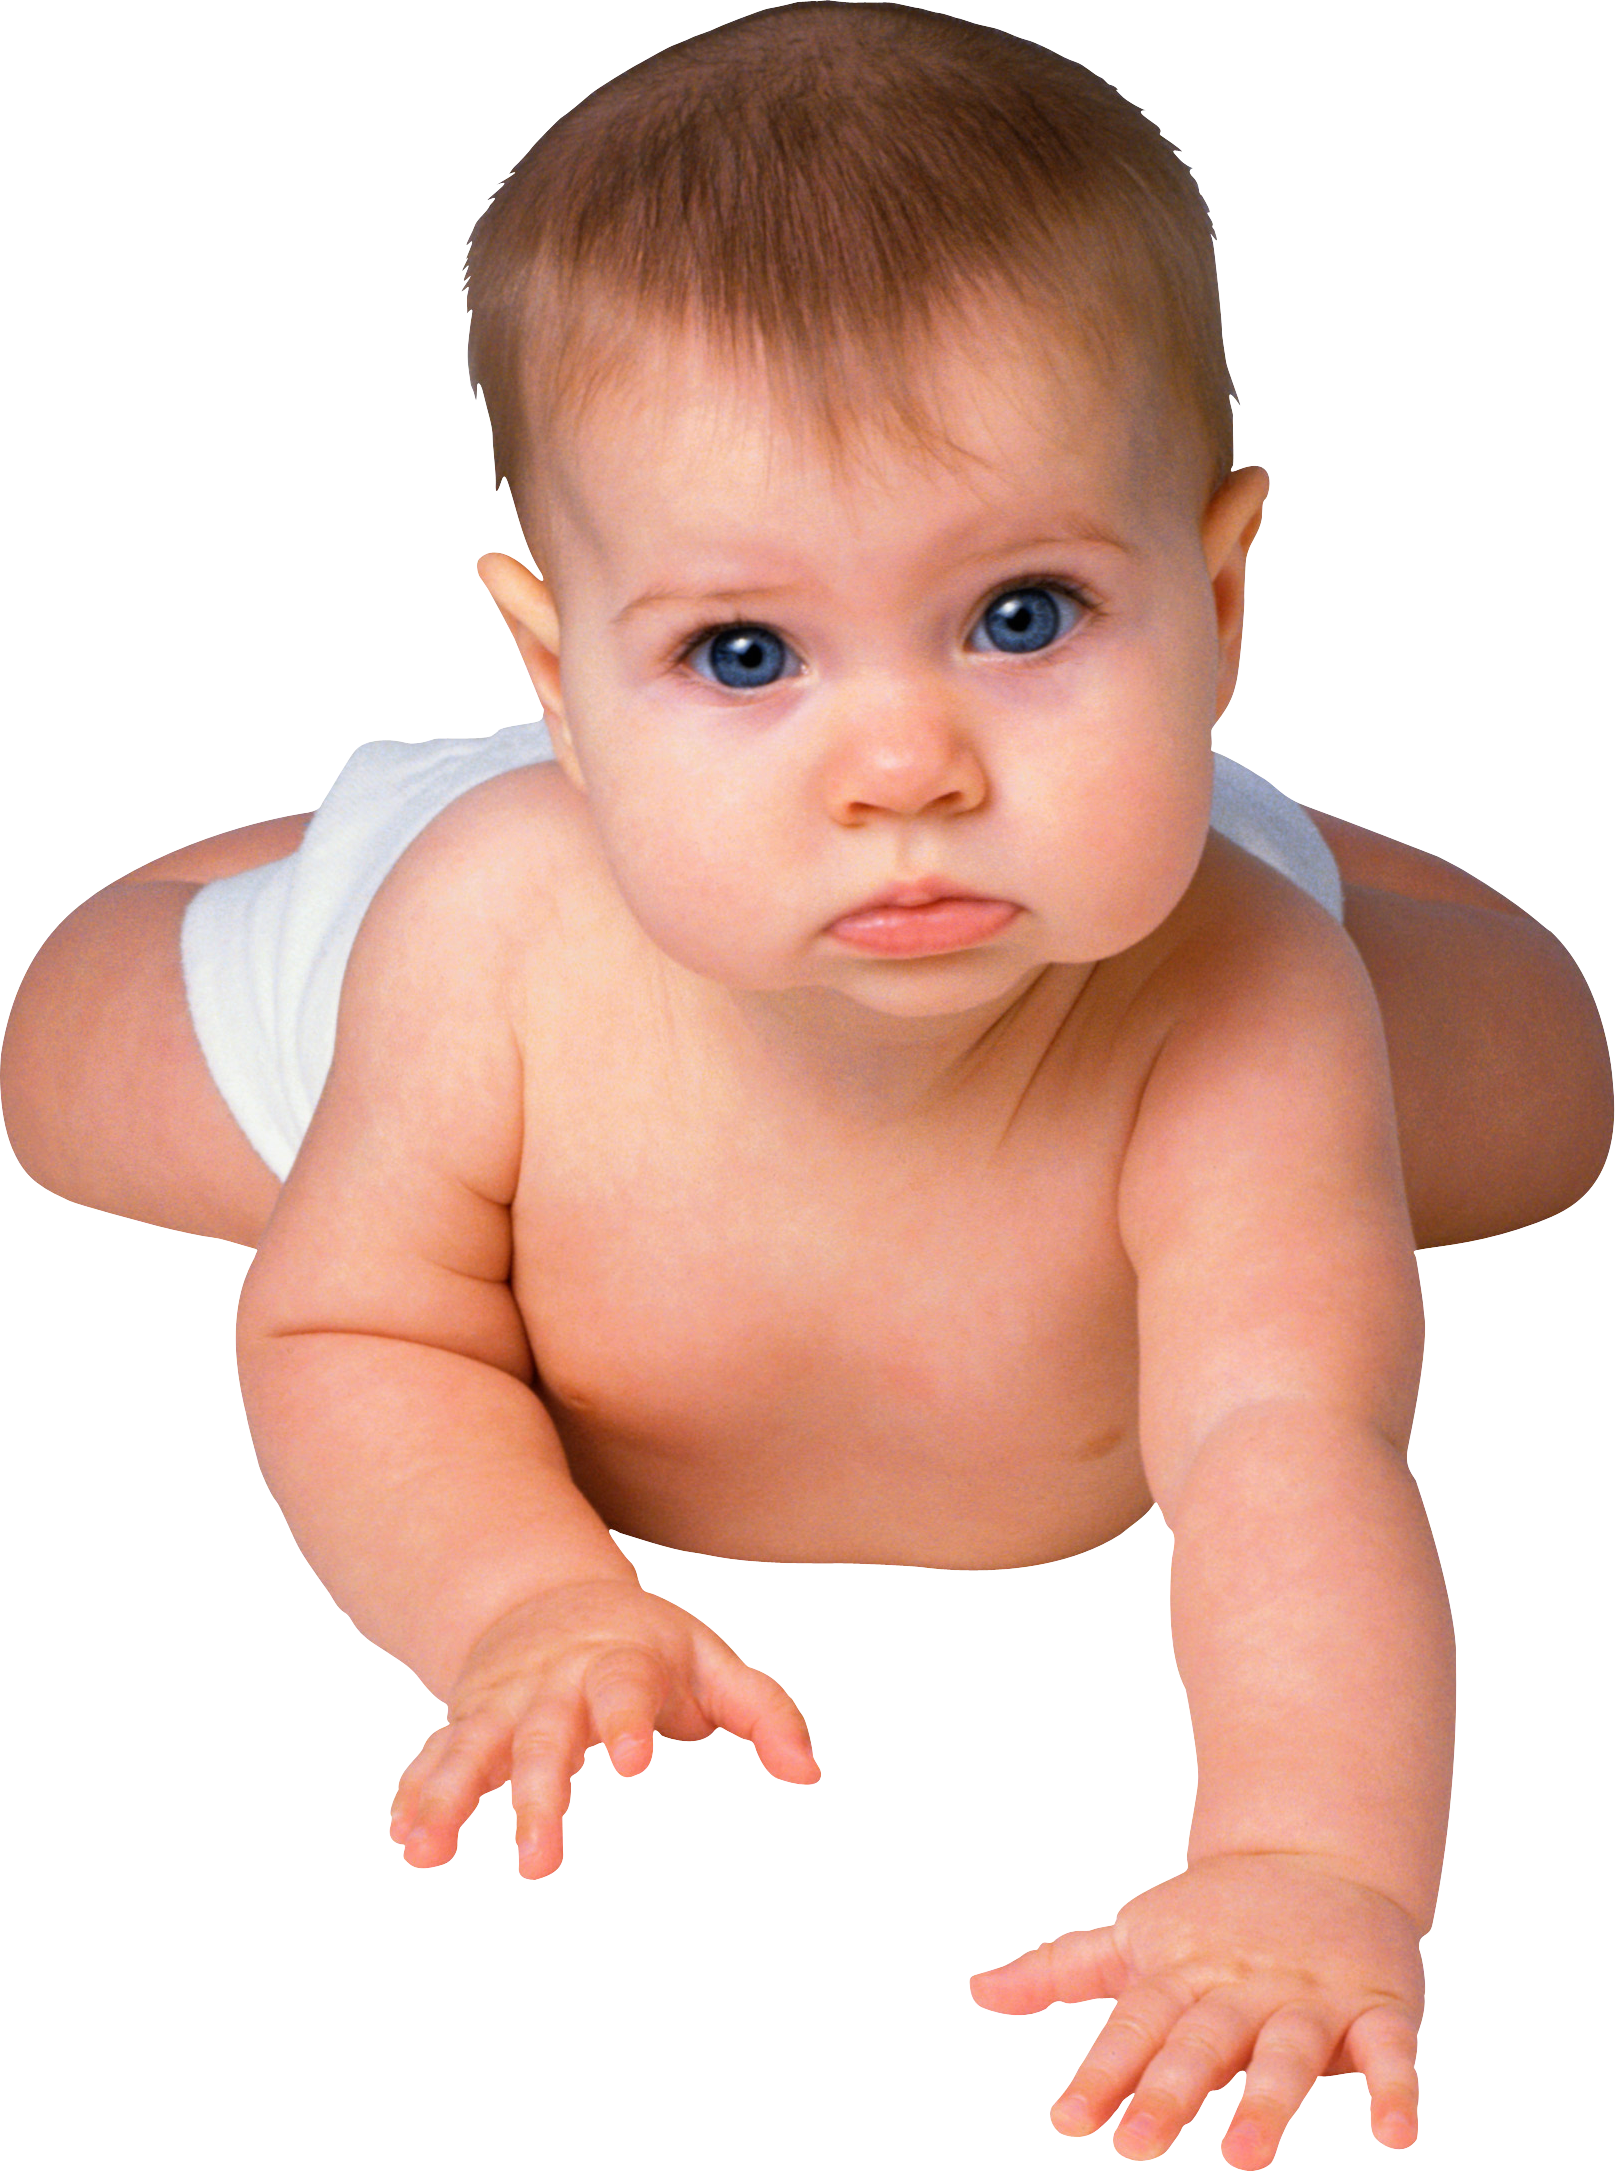 Baby Png - Baby, Transparent background PNG HD thumbnail